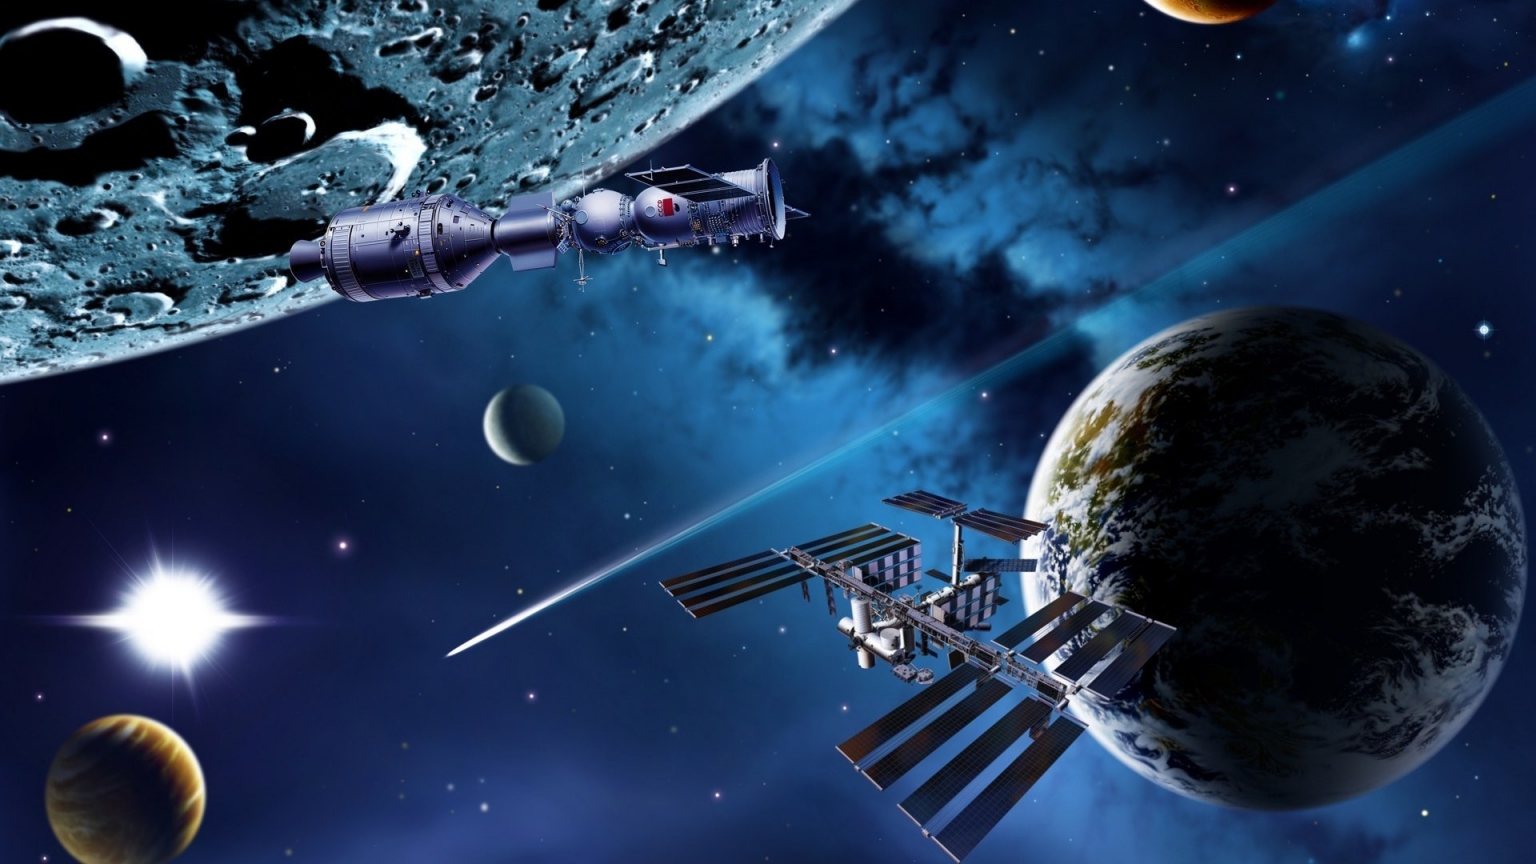 Space Mission Activity for 1536 x 864 HDTV resolution